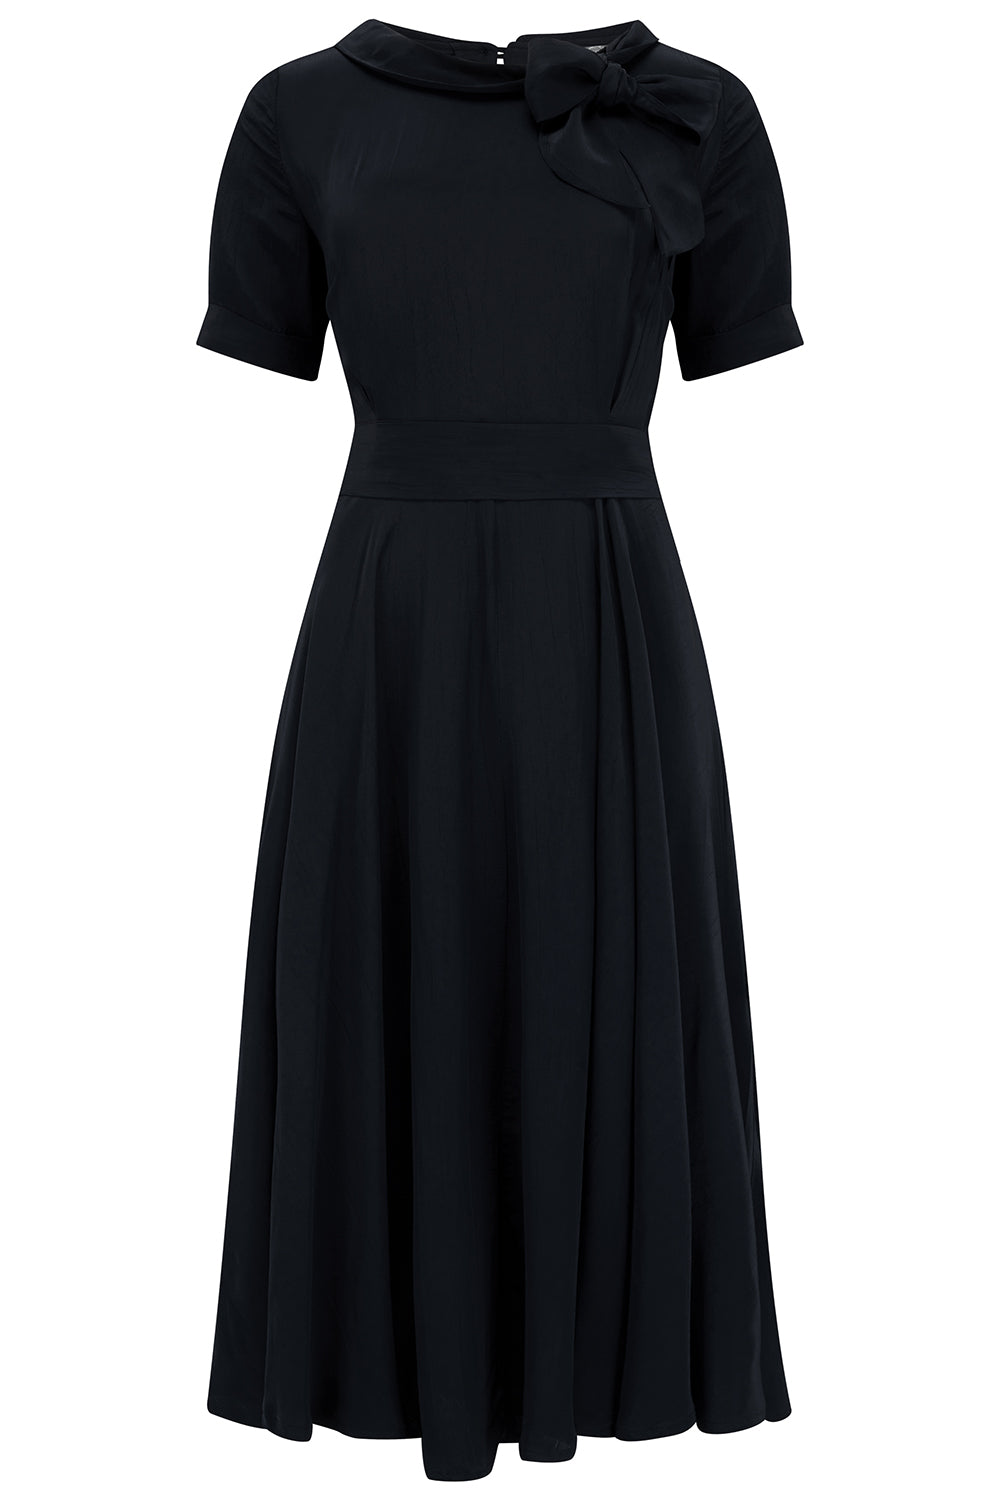 Cindy Dress in Black by The Seamstress Of Bloomsbury, Classic 1940s Vintage Inspired Style - True and authentic vintage style clothing, inspired by the Classic styles of CC41 , WW2 and the fun 1950s RocknRoll era, for everyday wear plus events like Goodwood Revival, Twinwood Festival and Viva Las Vegas Rockabilly Weekend Rock n Romance The Seamstress Of Bloomsbury